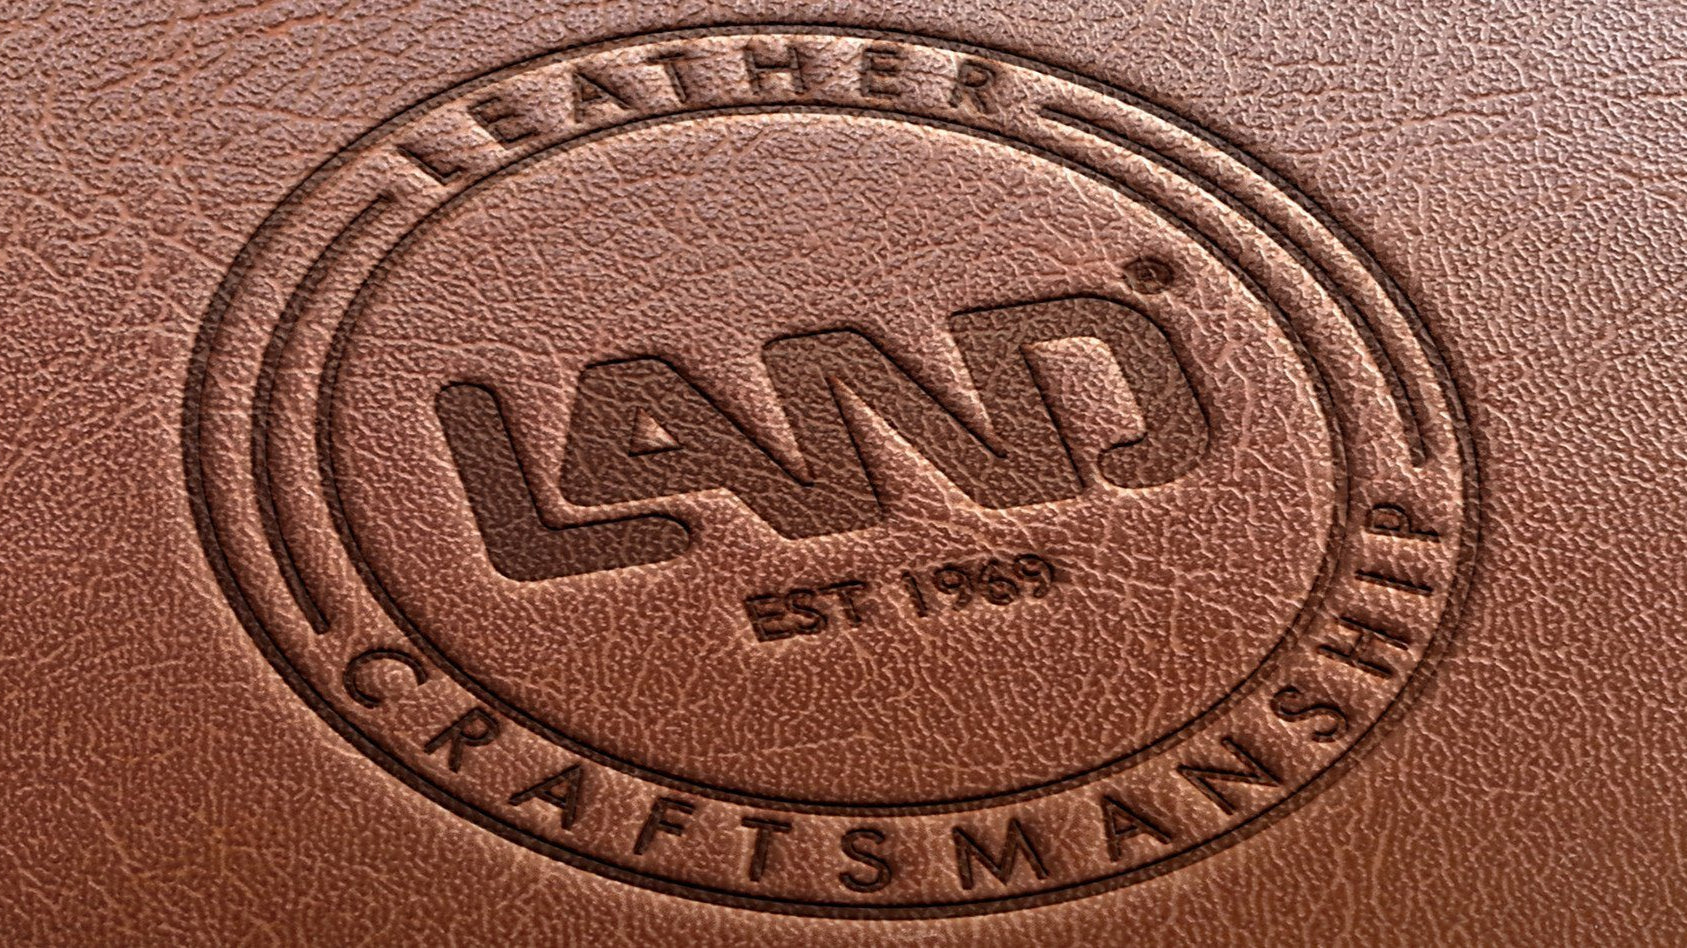 History of Leather